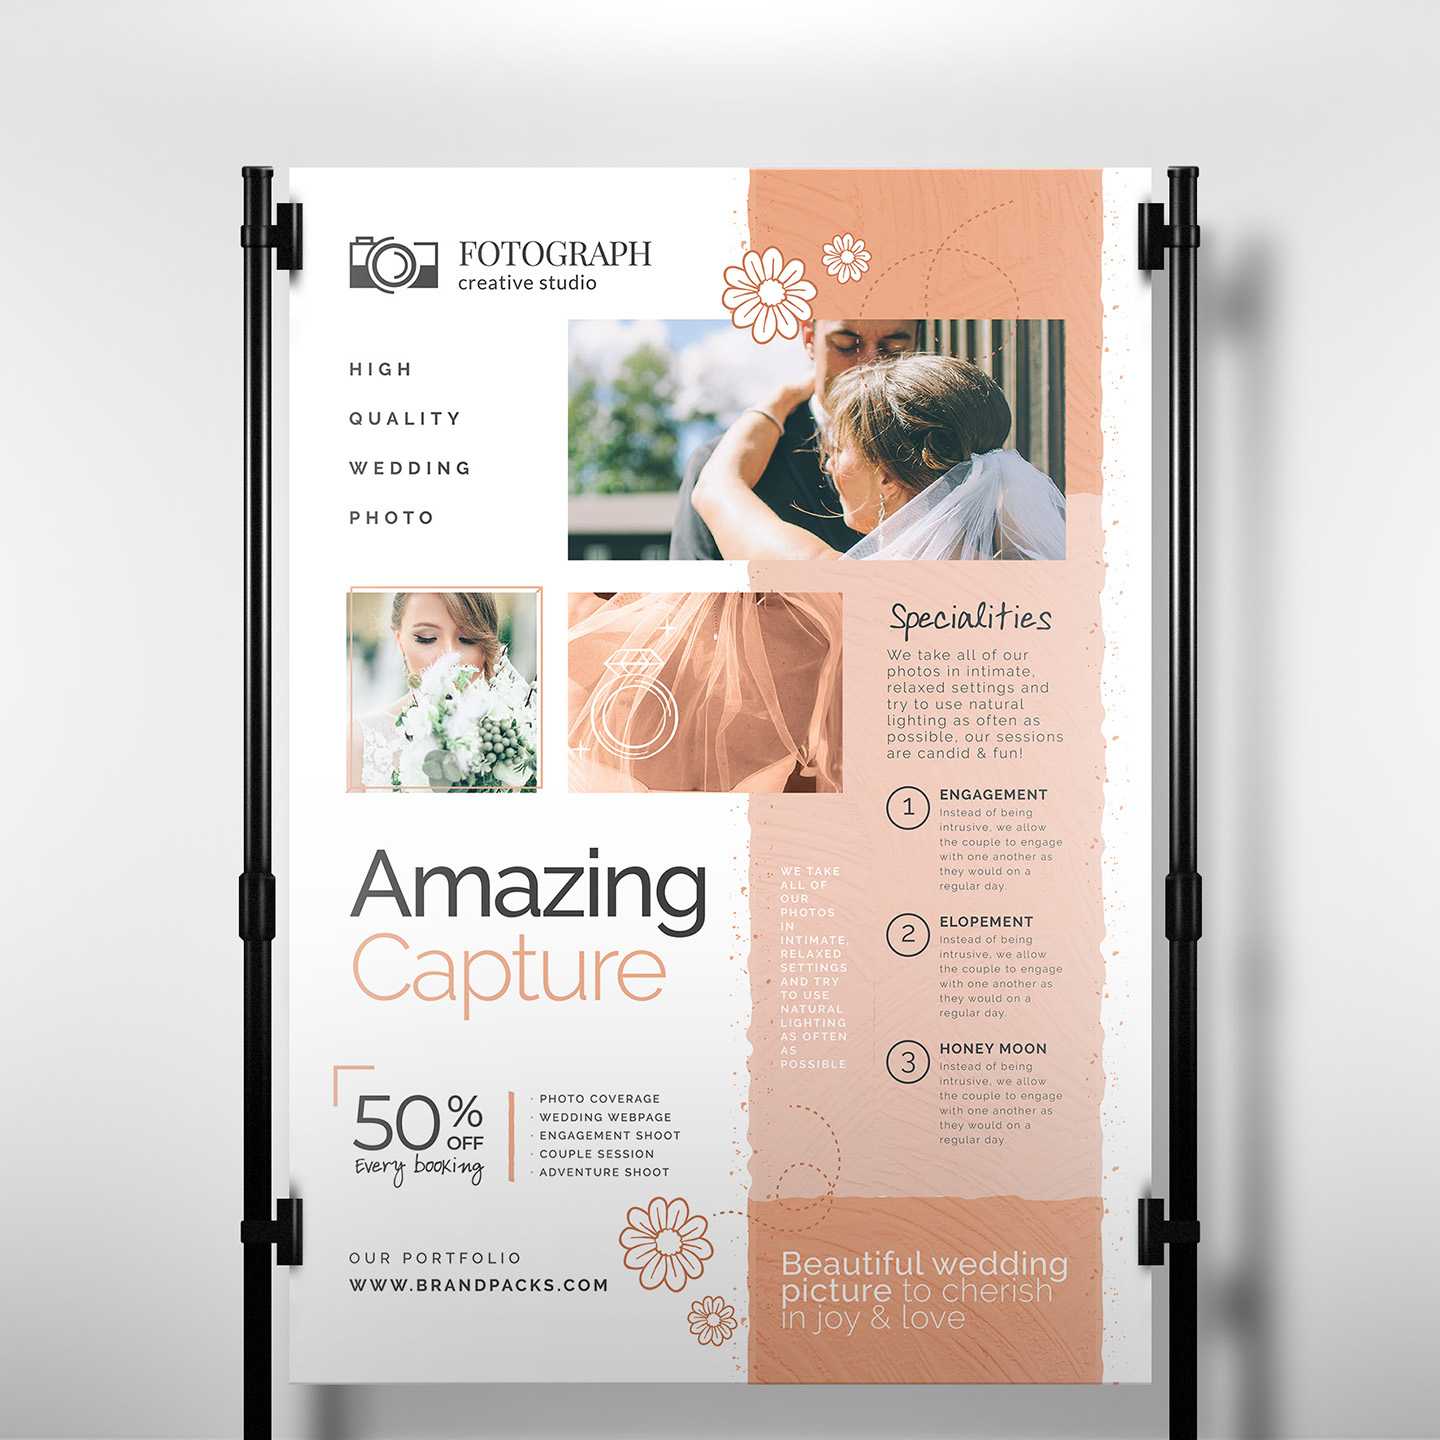 Photography Service Banner Template - Psd, Ai & Vector With Photography Banner Template